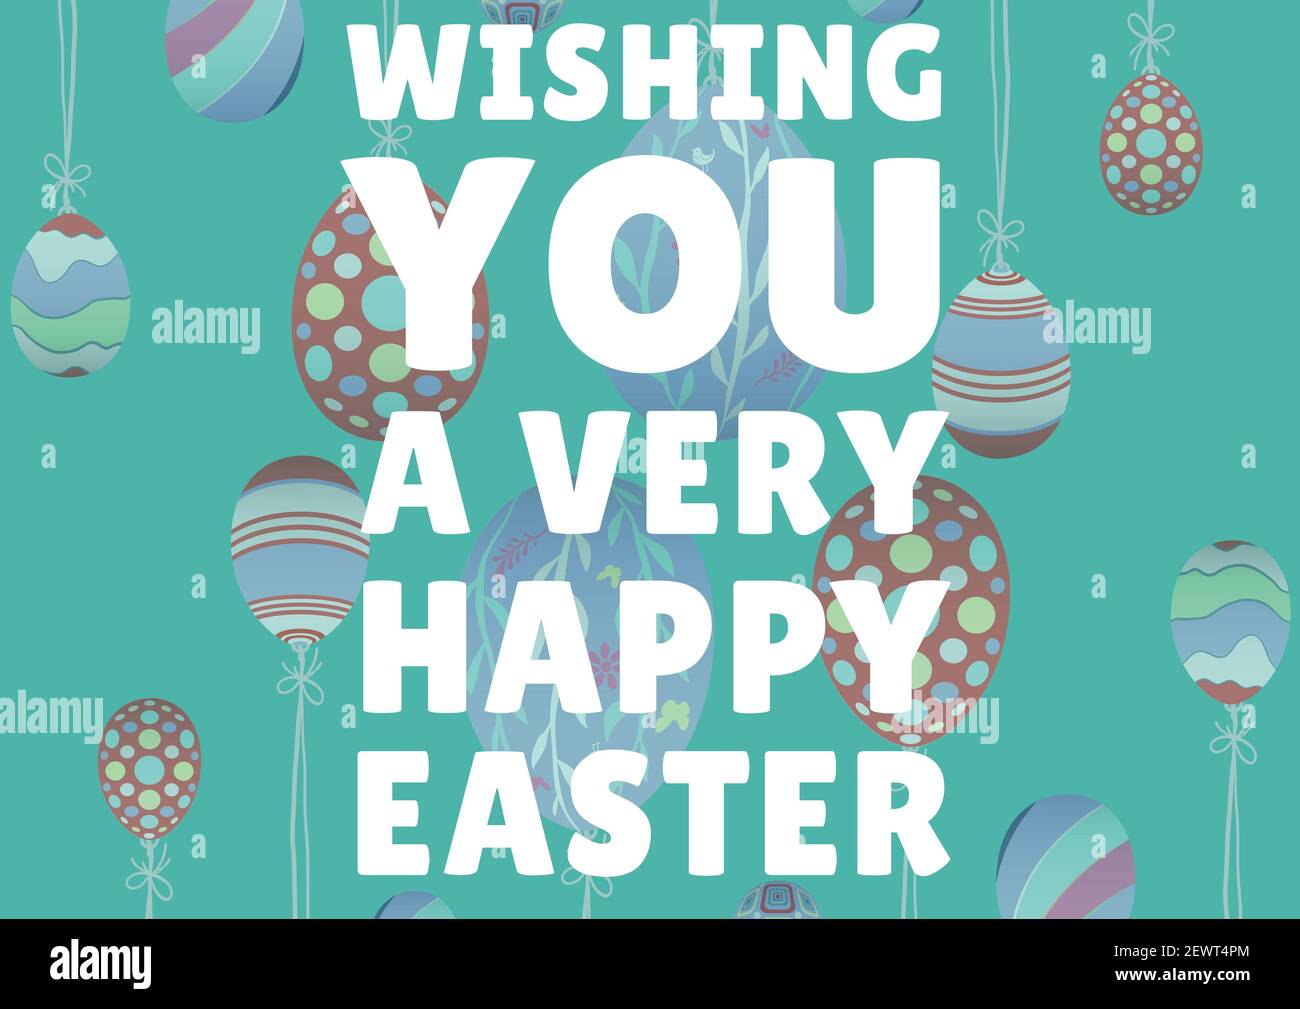 Wishing you a very happy easter text with easter eggs on green background Stock Photo